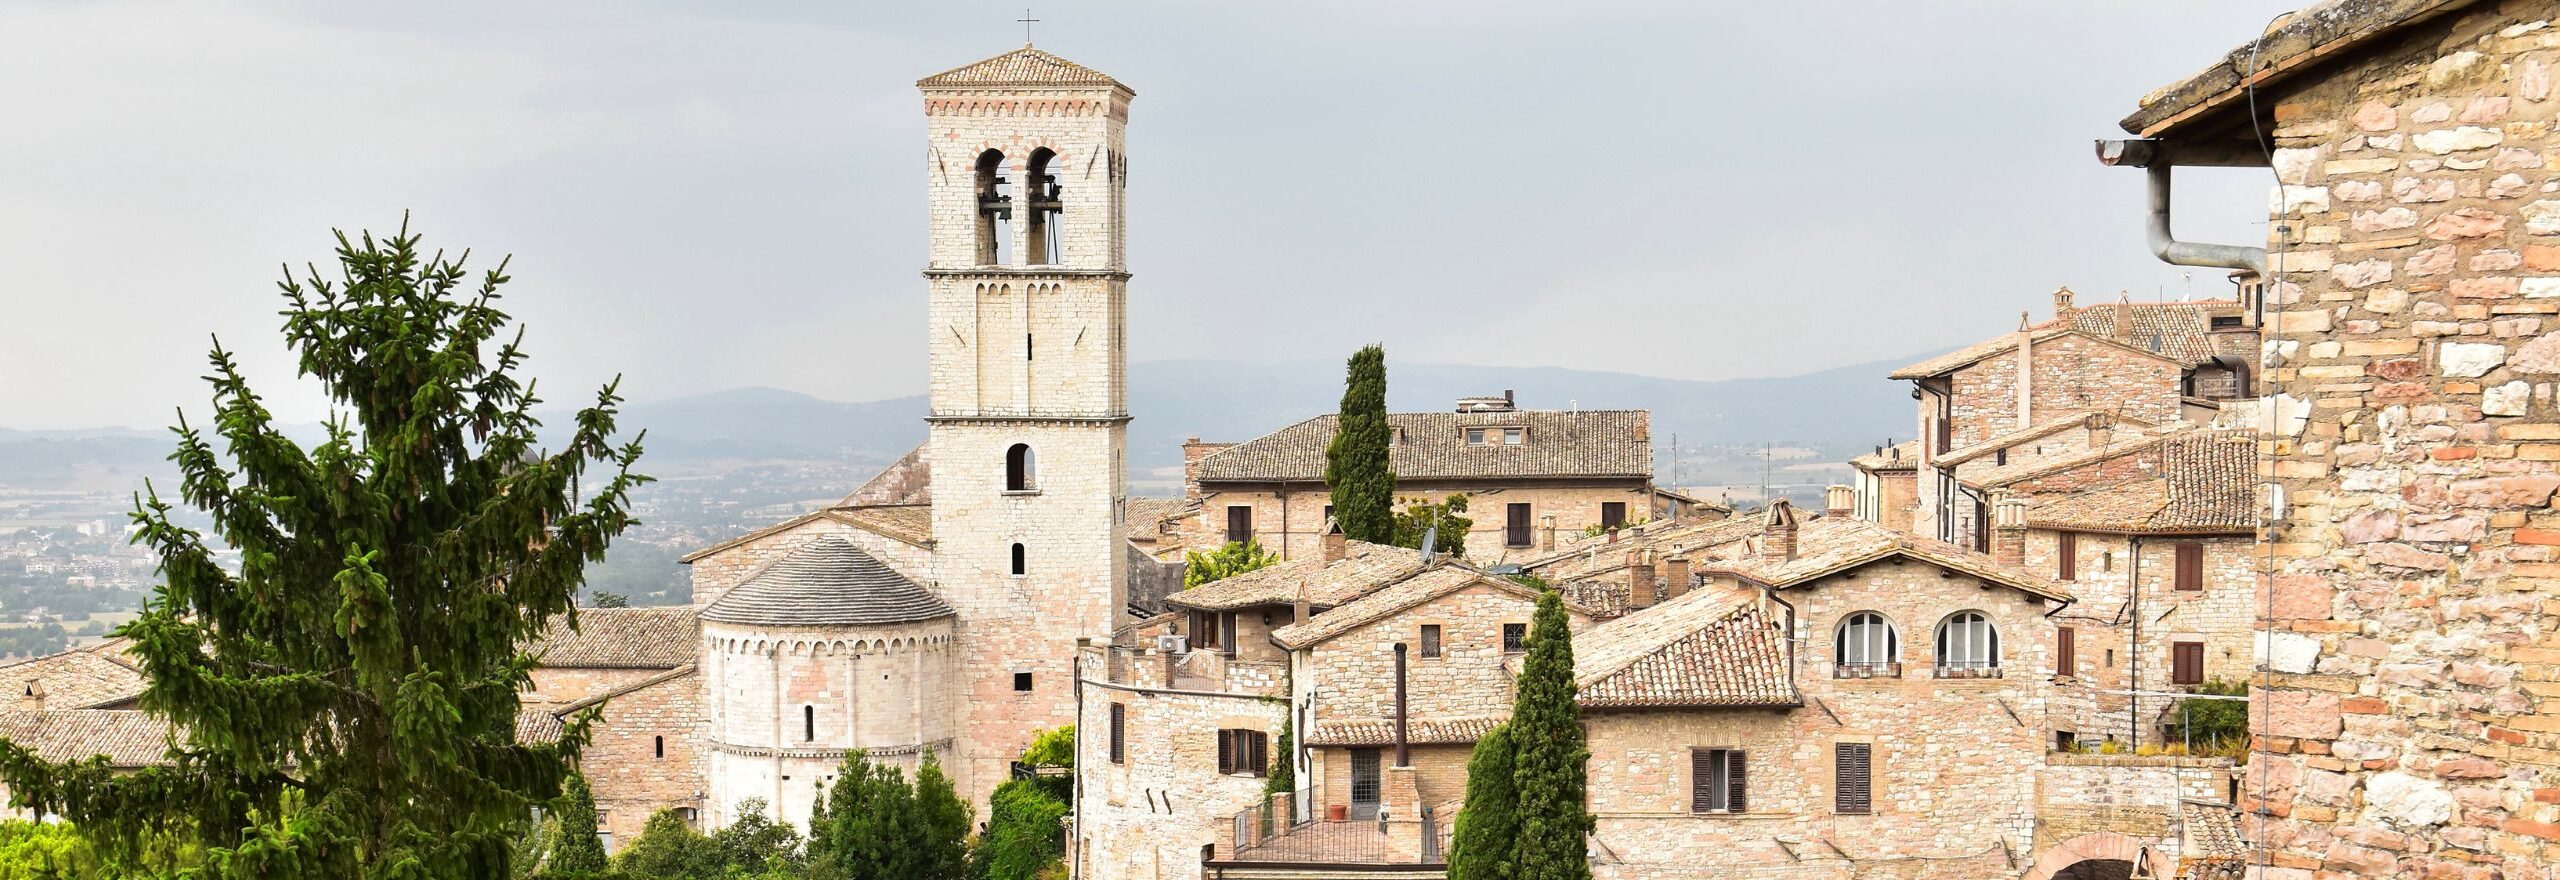 Self Guided Tour in Umbria